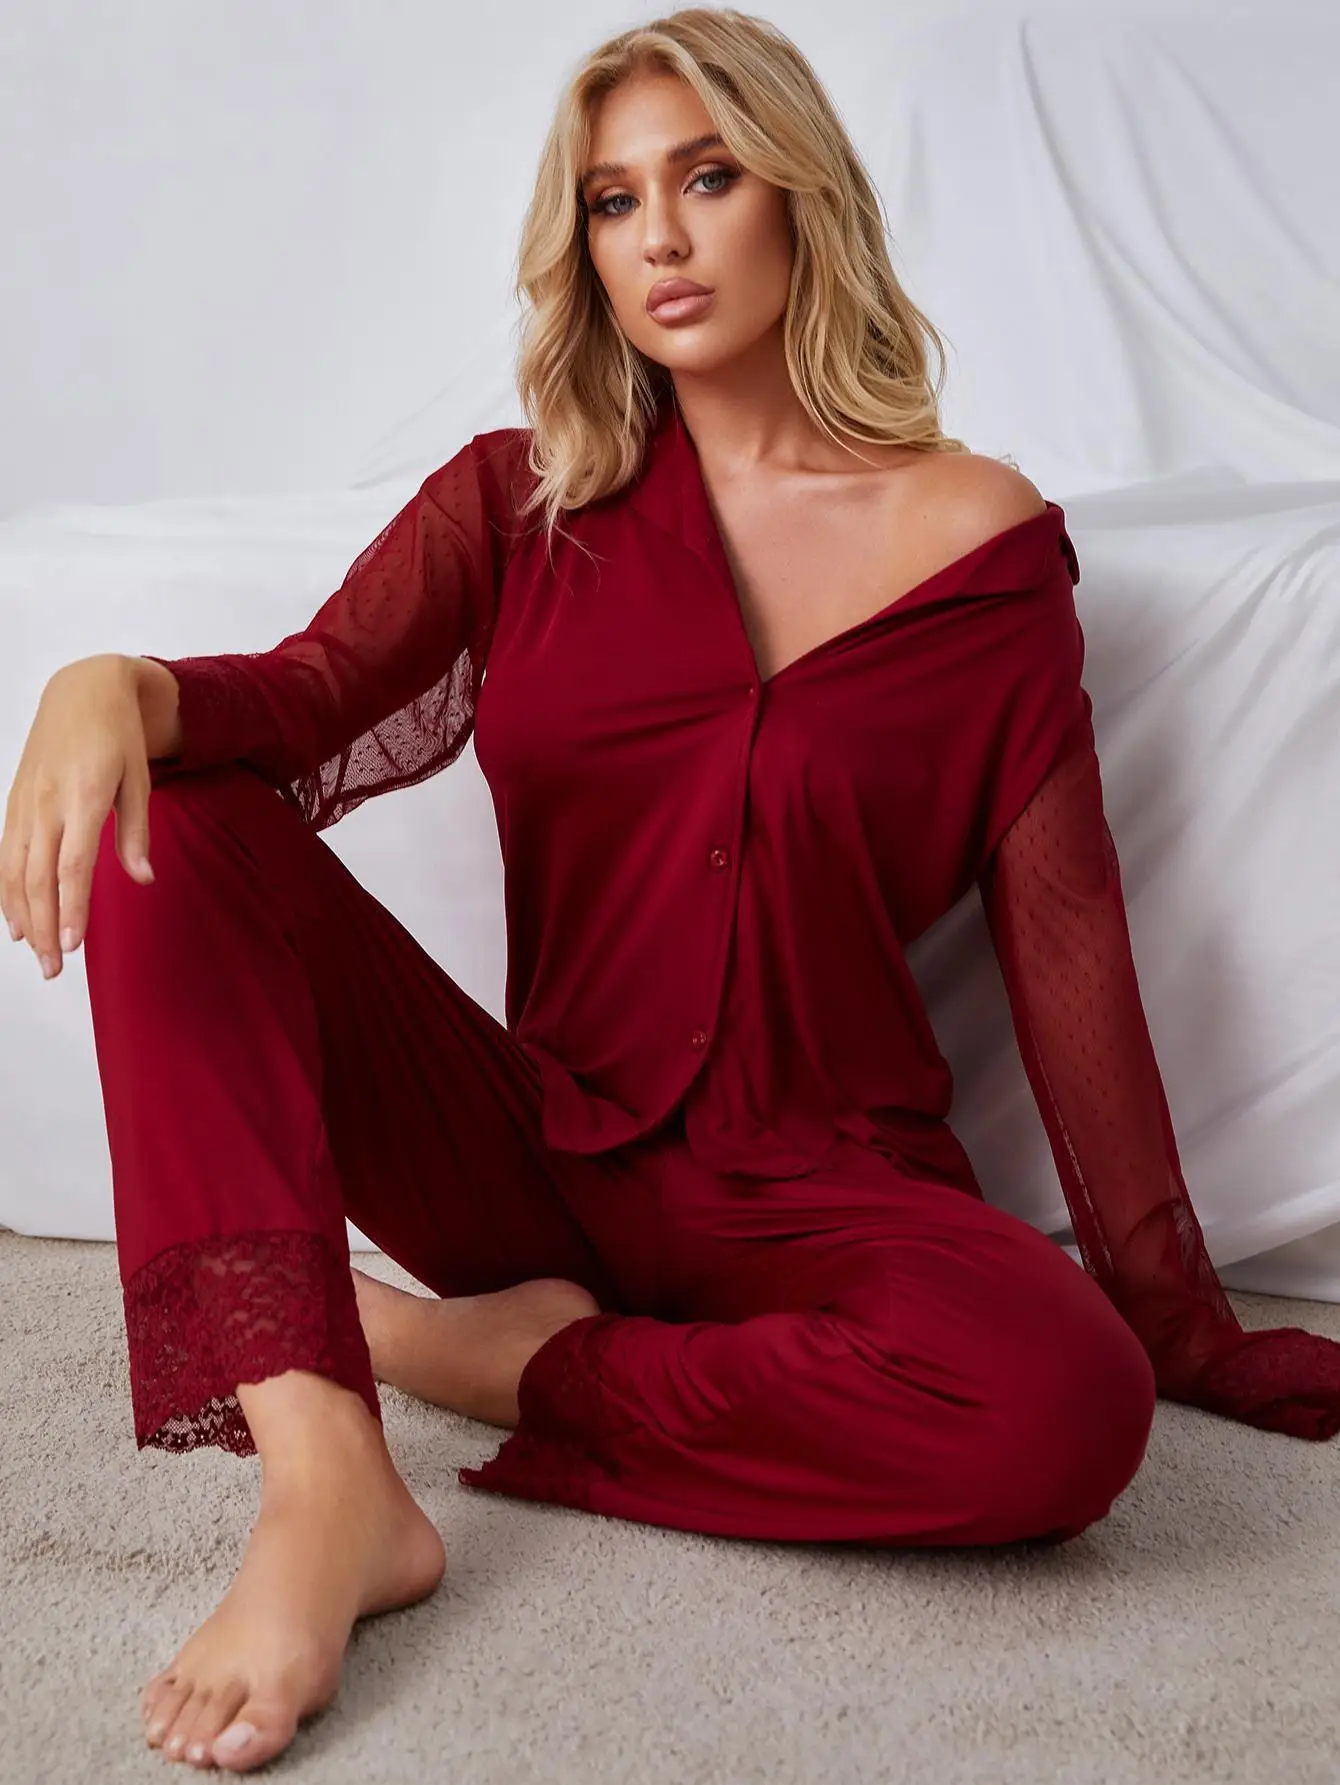 In Stock Leisure Wear Silk Loungewear Ladies Soft Casual Long Sleeve Satin Lace Sexy Pajamas Sets Wholesale